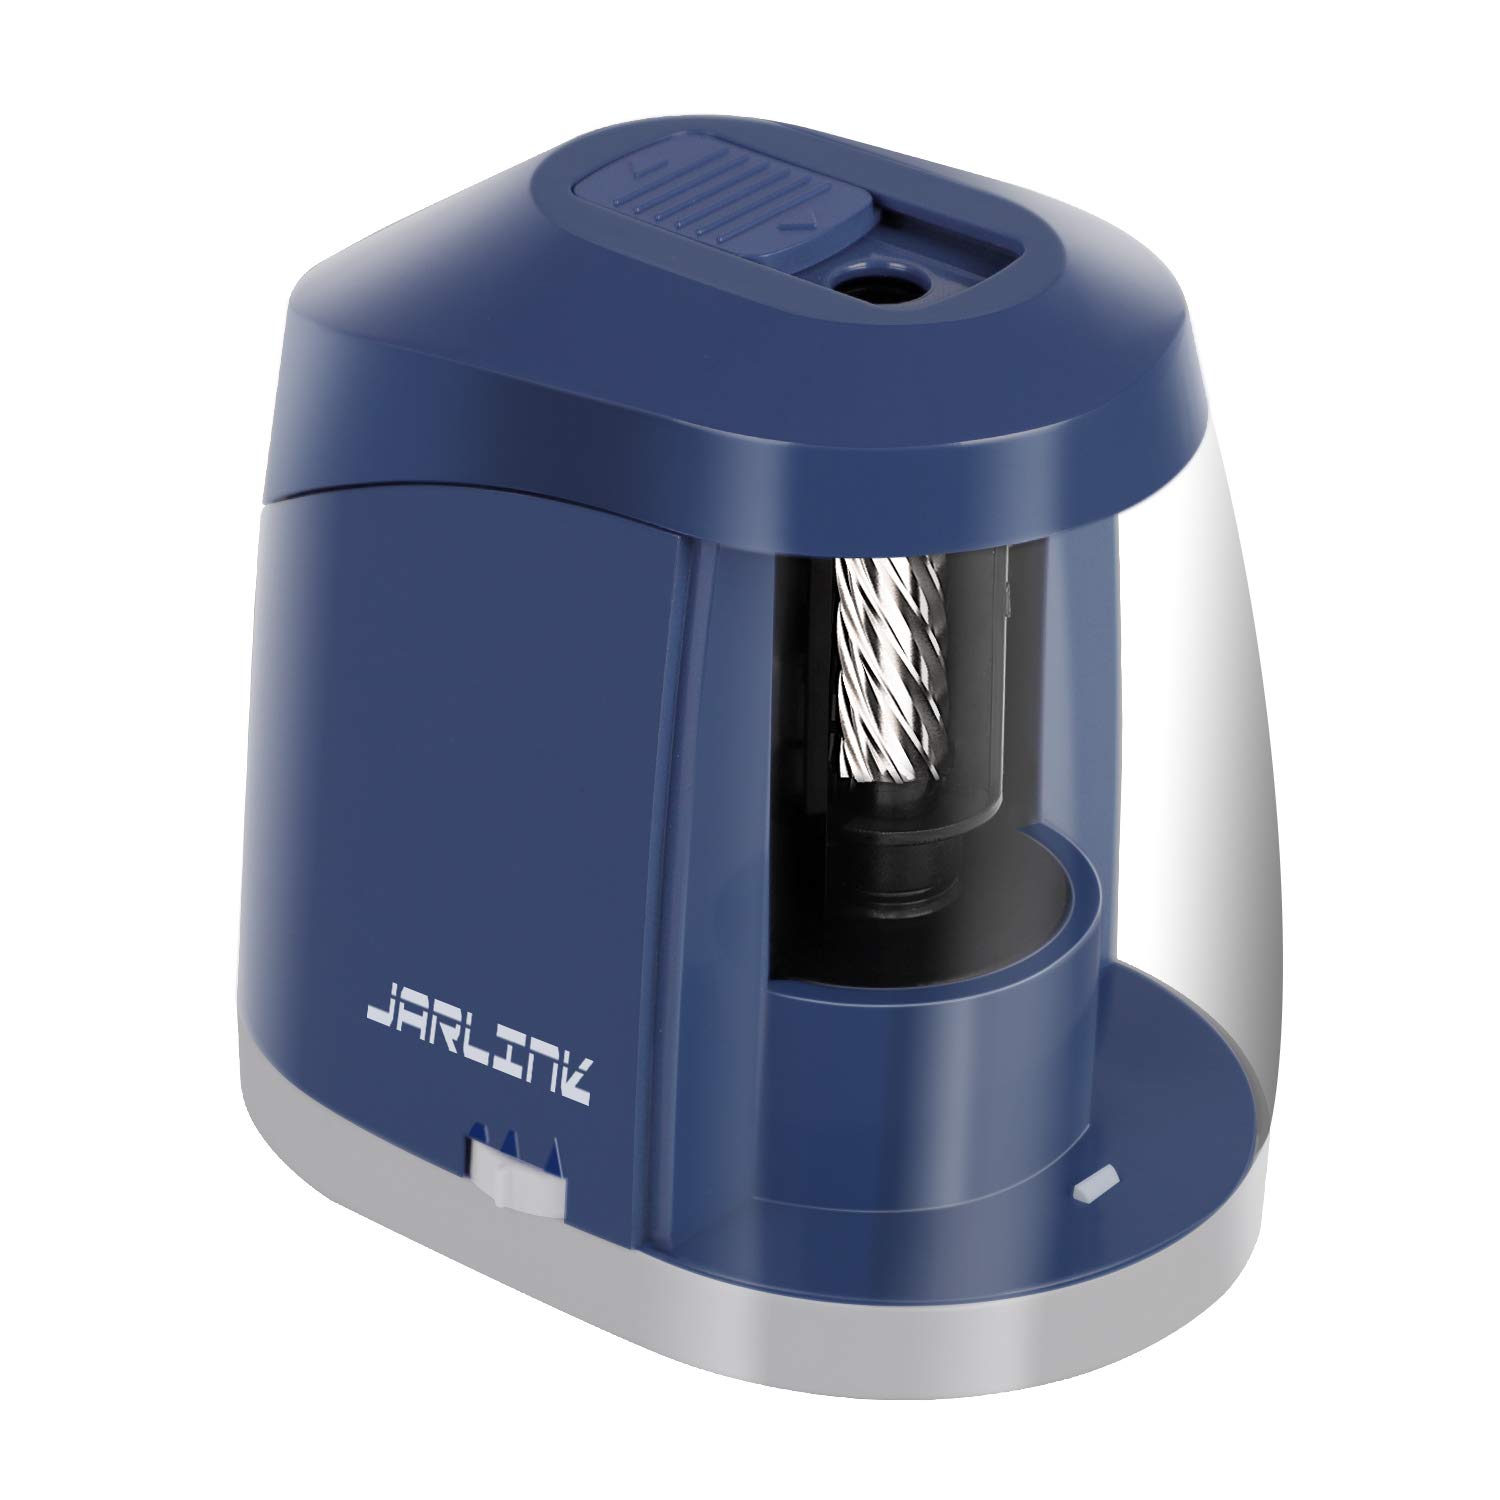 JARLINK Electric Pencil Sharpener, Auto Stop AC Adapter Operated Sharp